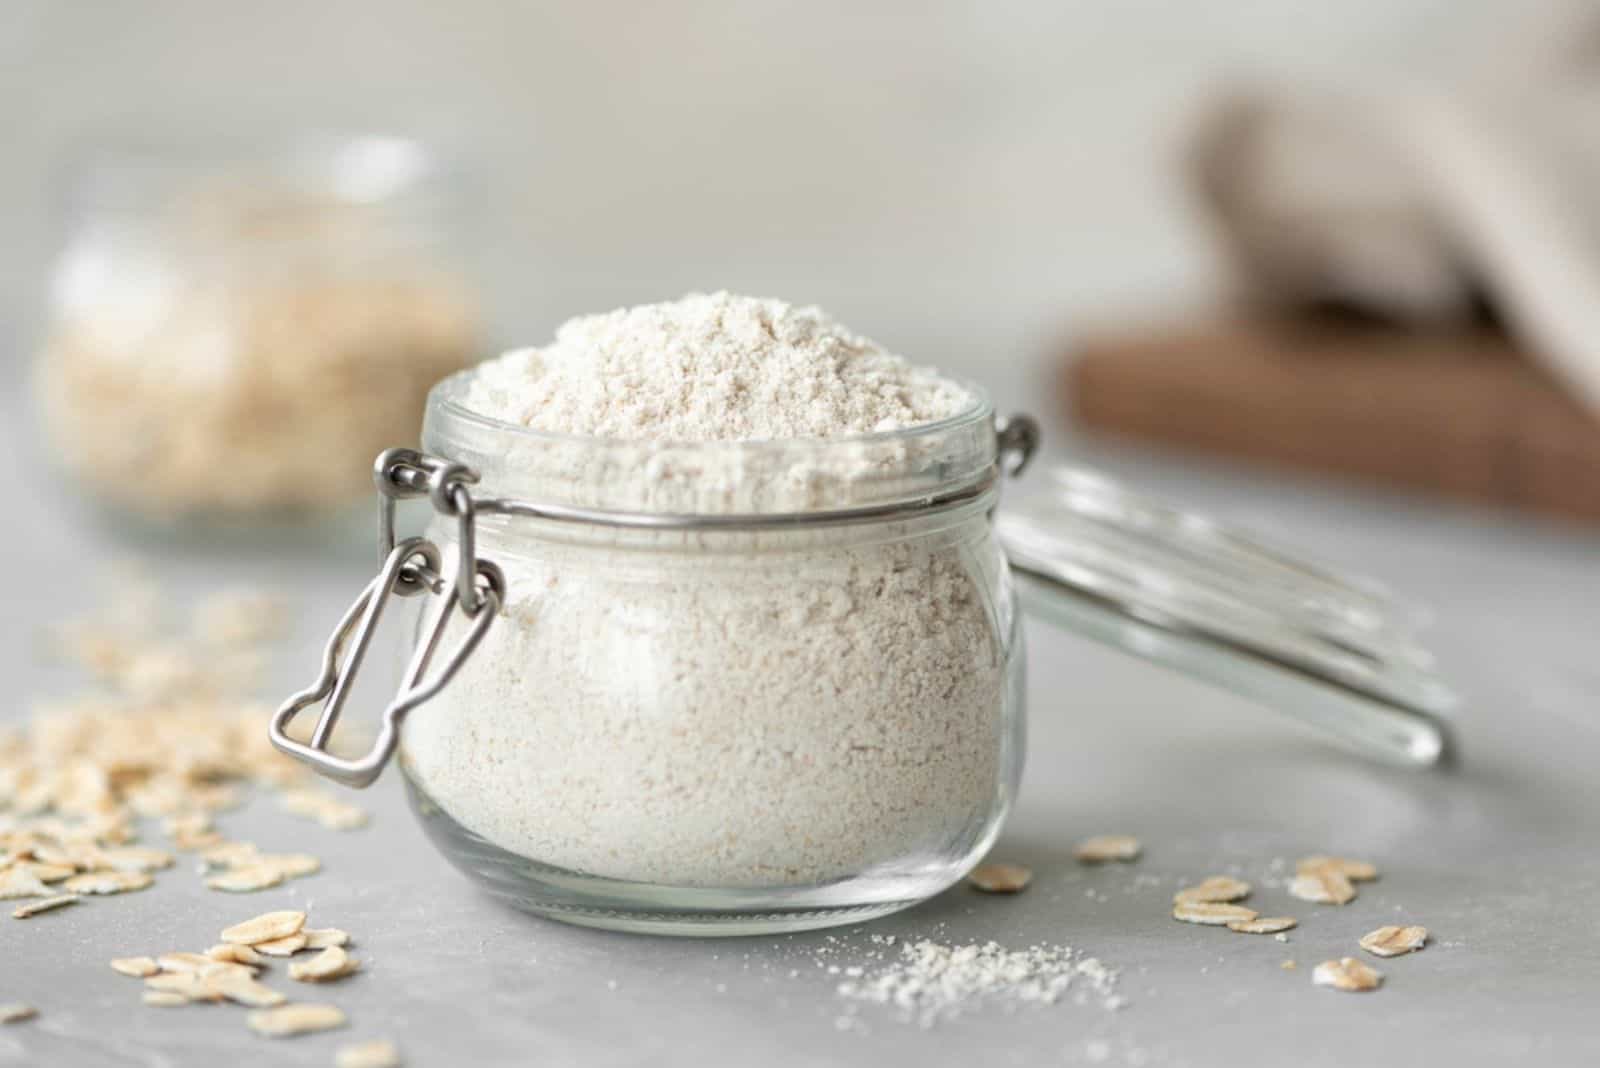 oat flour in a glass jar on a white table